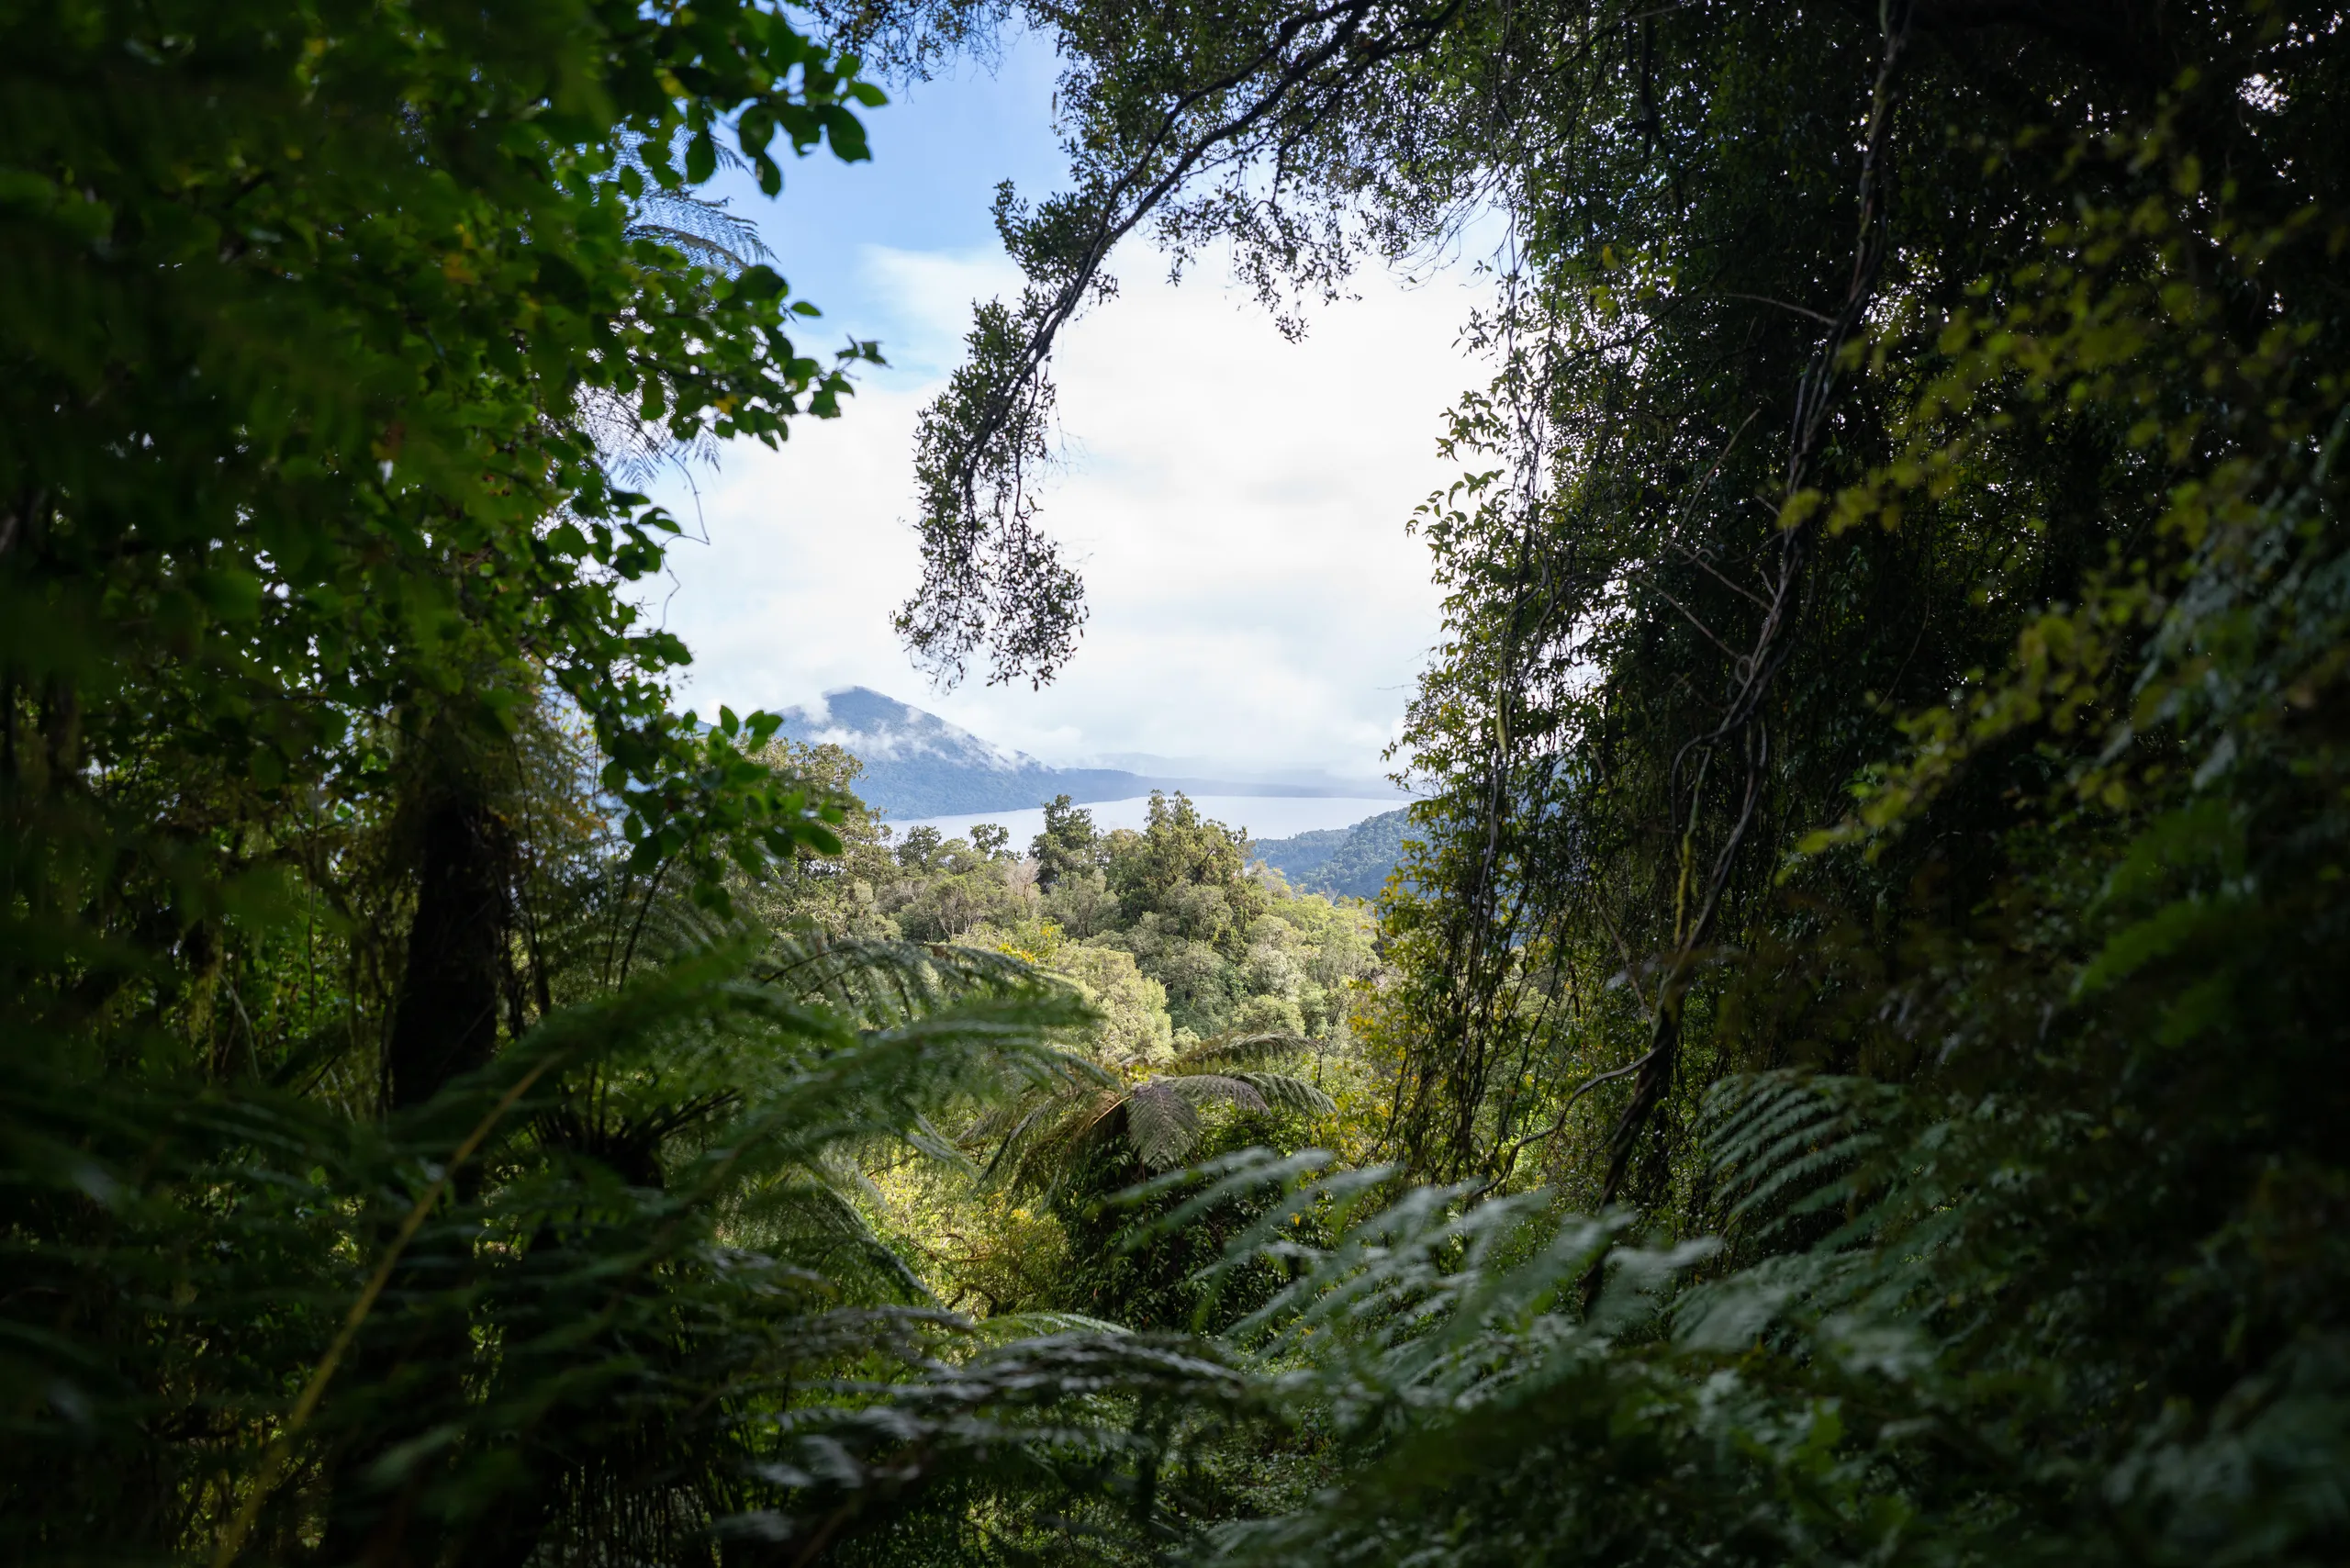 Glimpse of Lake Kaniere from the densely-forested track